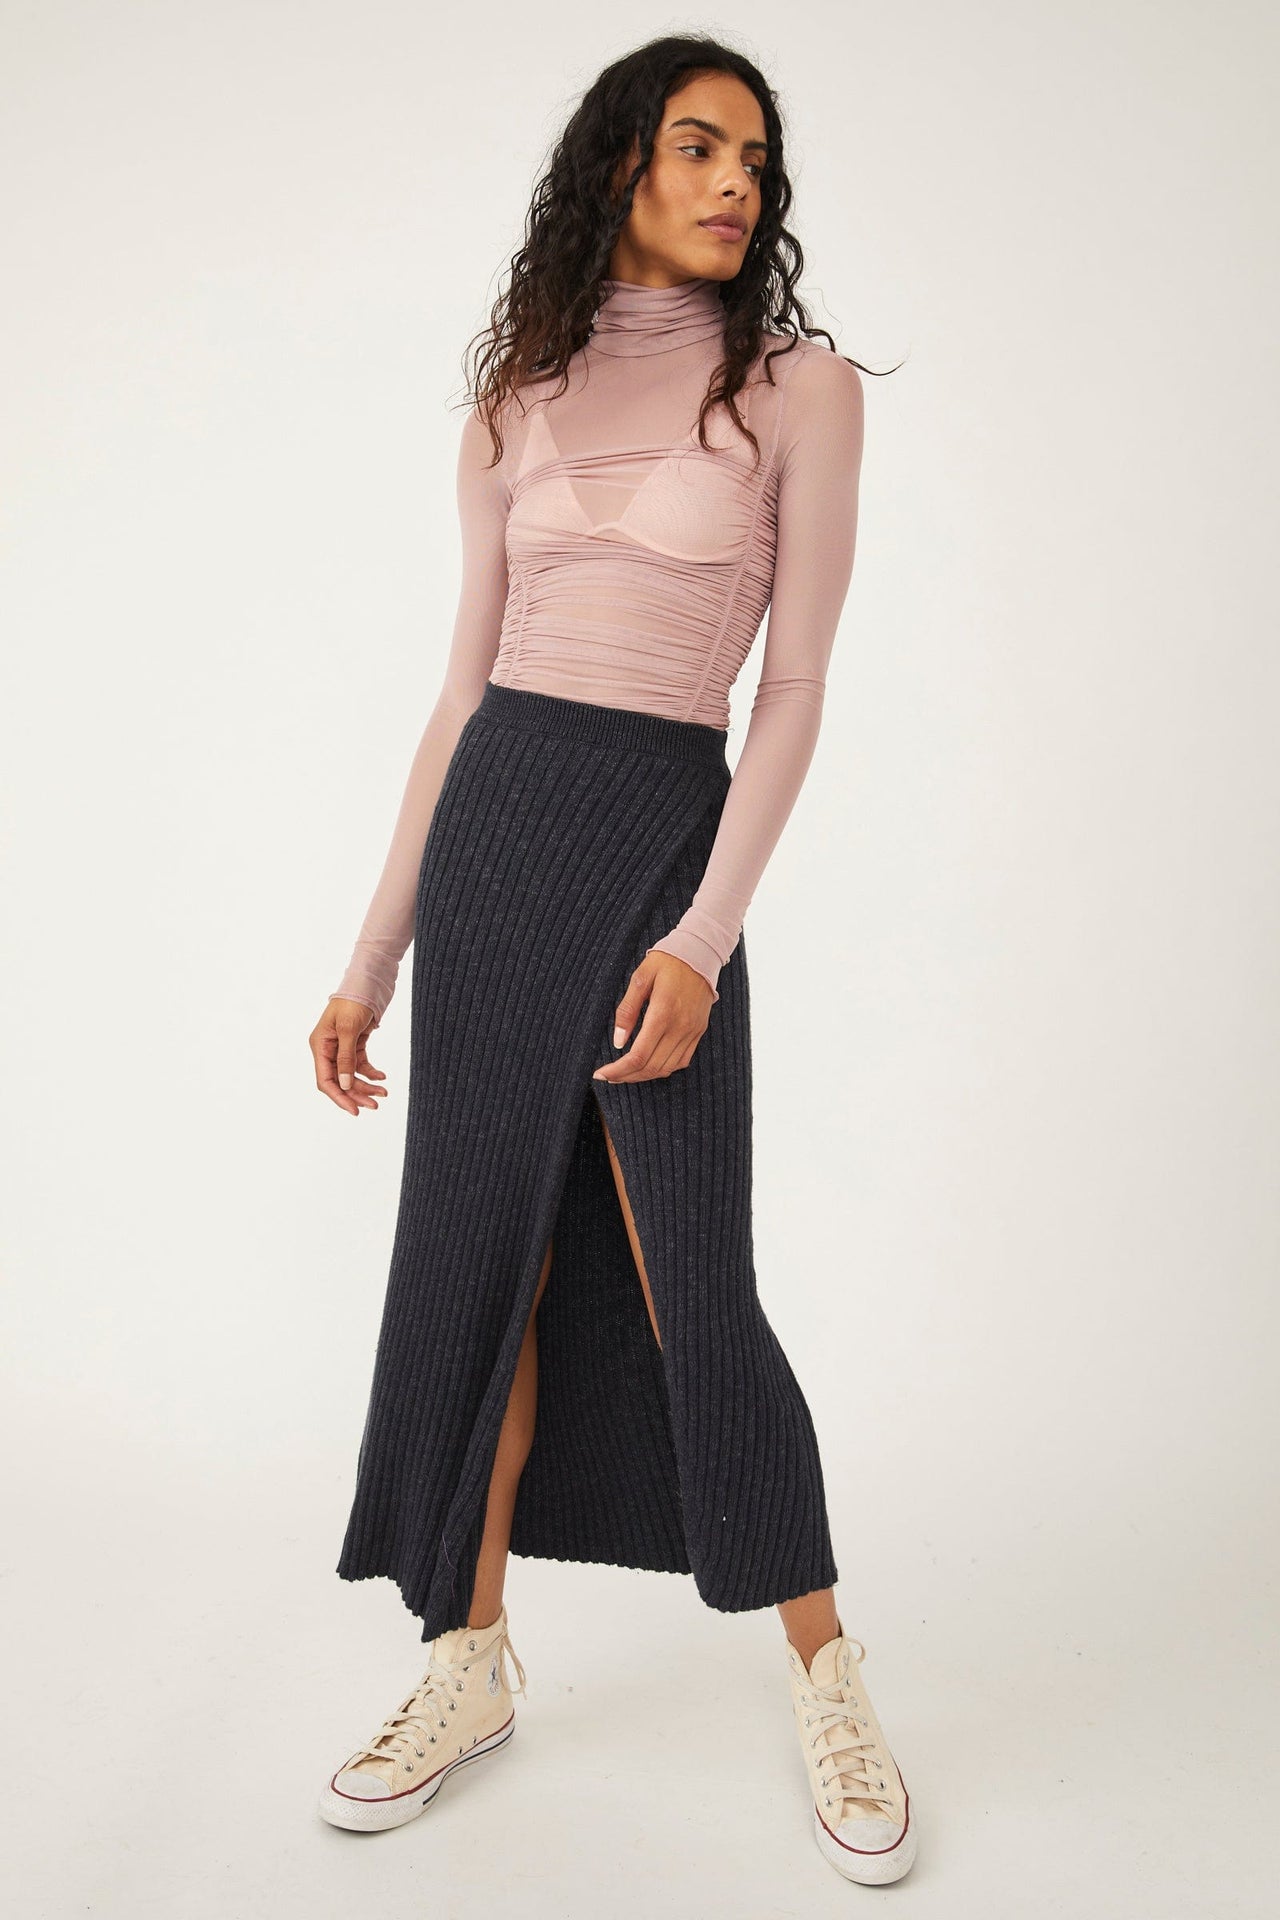 Better Days Knit Midi Skirt Black Combo, Skirt by Free People | LIT Boutique